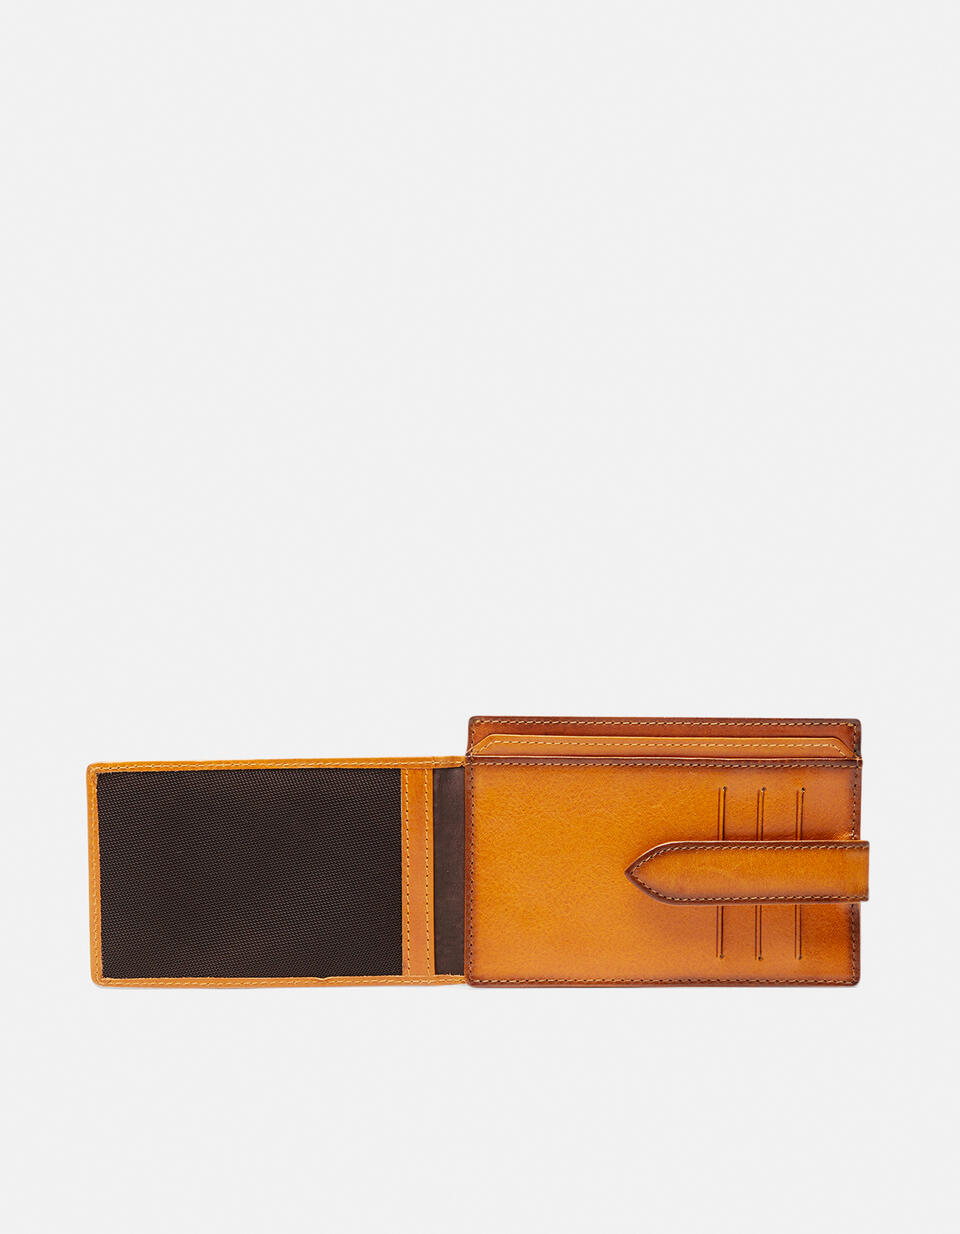 Warm and Color Anti-RFID cardholder - Women's Wallets - Men's Wallets | Wallets GIALLO - Women's Wallets - Men's Wallets | WalletsCuoieria Fiorentina